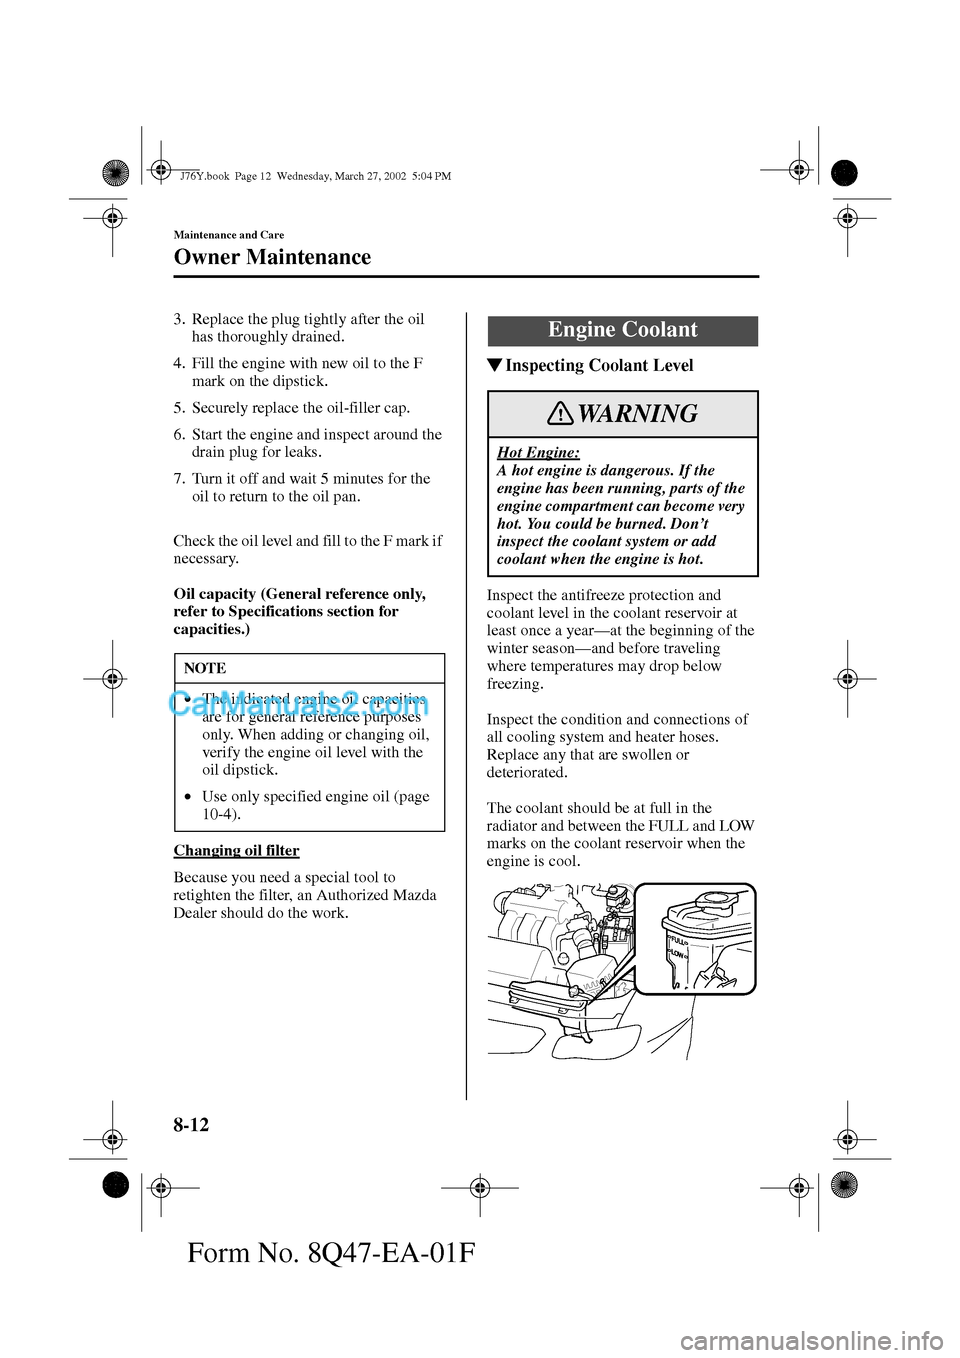 MAZDA MODEL MILLENIA 2002  Owners Manual (in English) 8-12
Maintenance and Care
Owner Maintenance
Form No. 8Q47-EA-01F
3. Replace the plug tightly after the oil 
has thoroughly drained.
4. Fill the engine with new oil to the F 
mark on the dipstick.
5. S